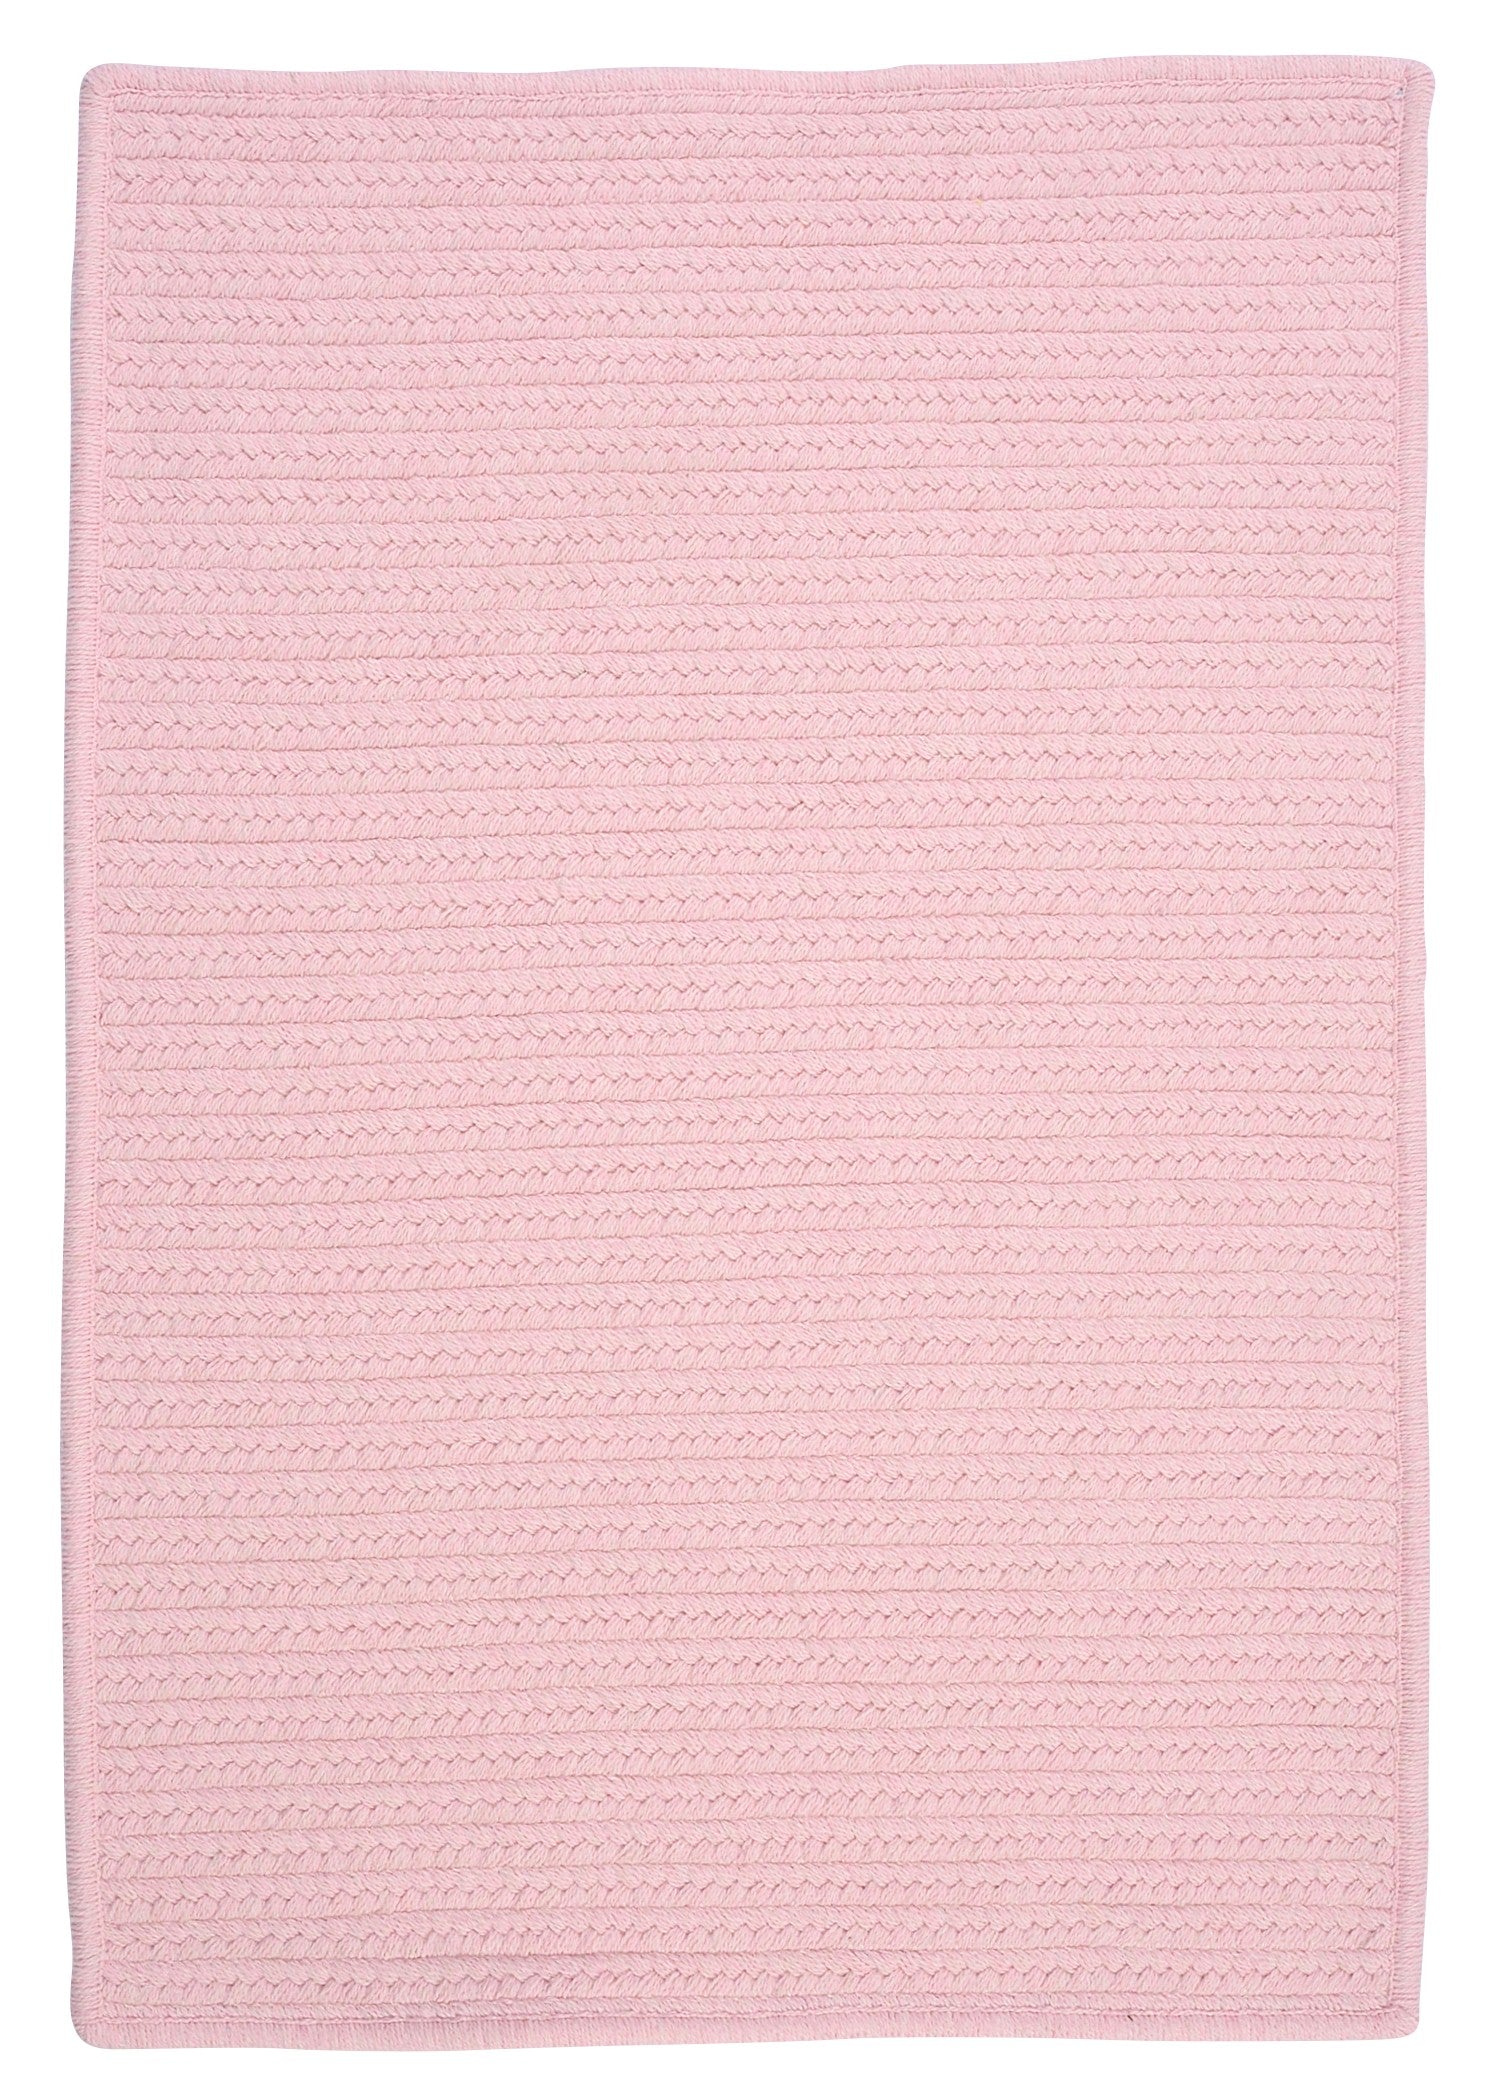 Colonial Mills Westminster WM51 Blush Pink Traditional Area Rug